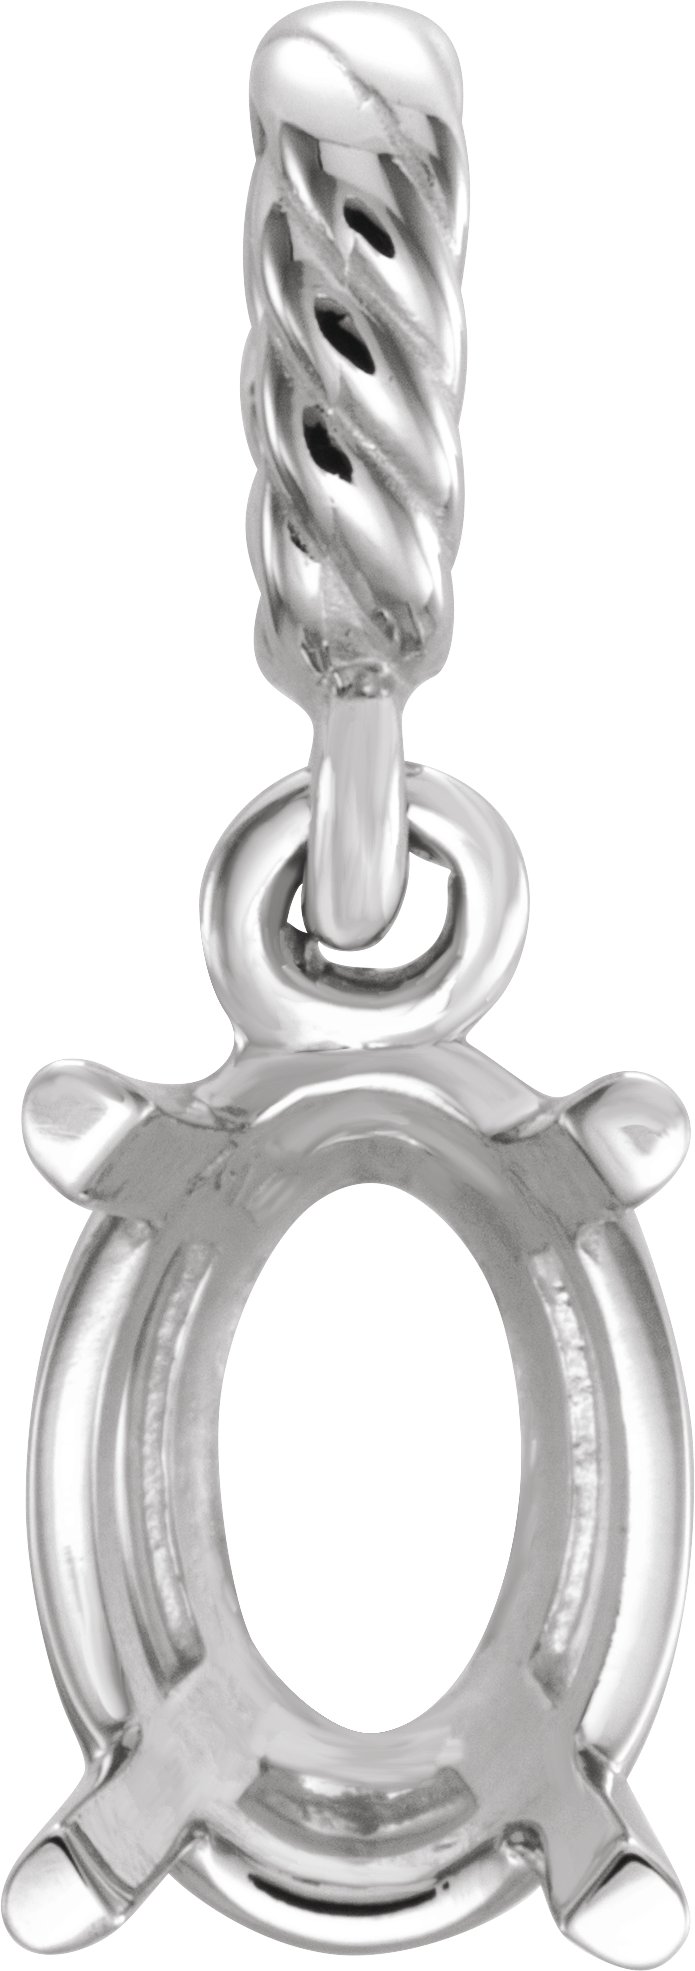 652183 / Sterling Silver / Oval 4- Prong Rope Pendant Mounting